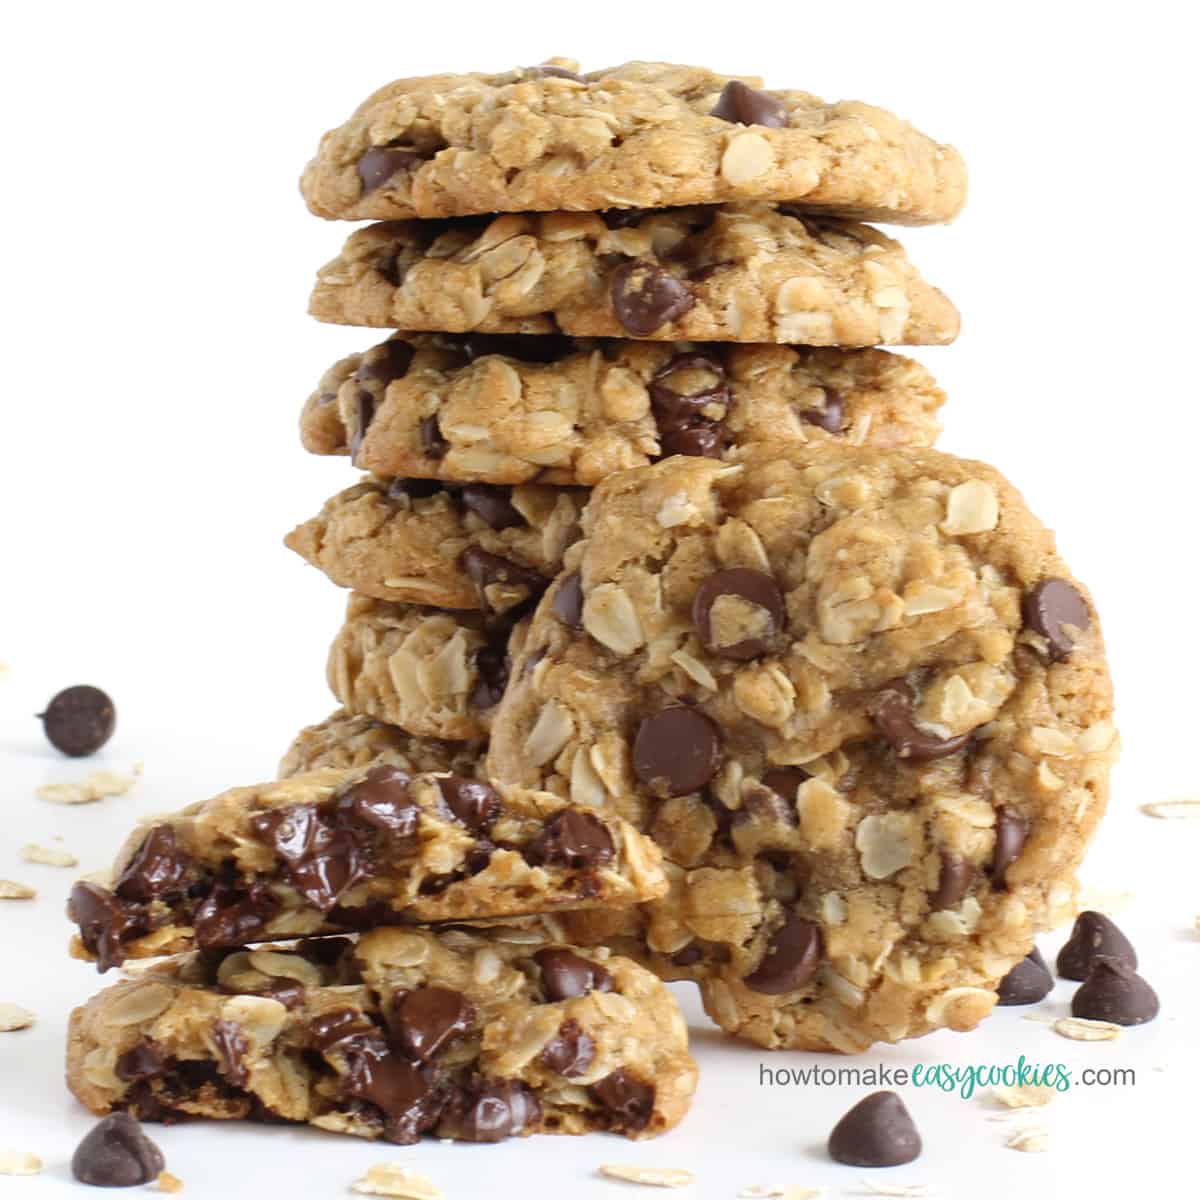 chewy chocolate chip oatmeal cookies